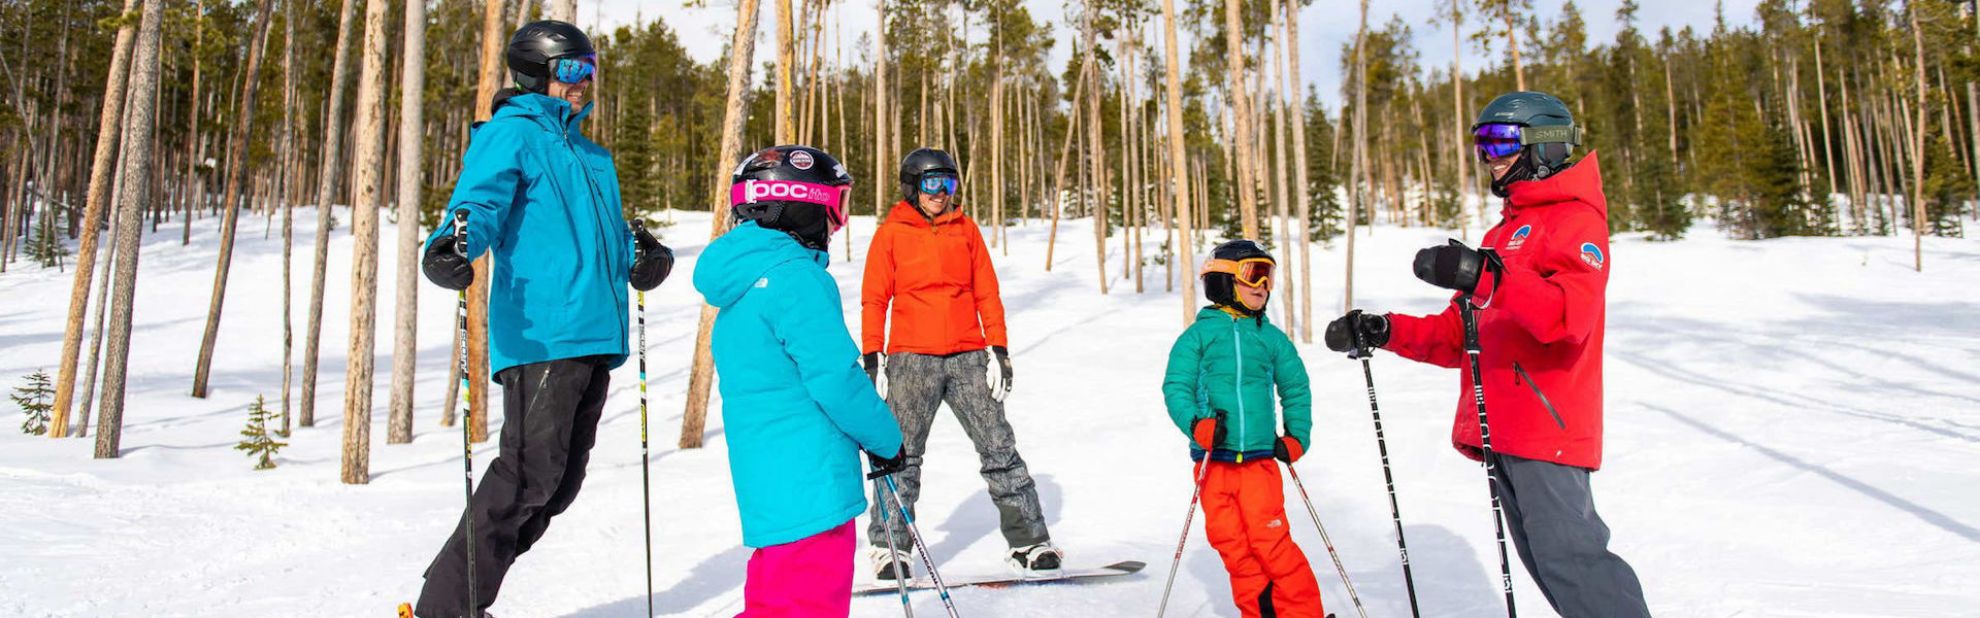 Family skiing with a ski instructor